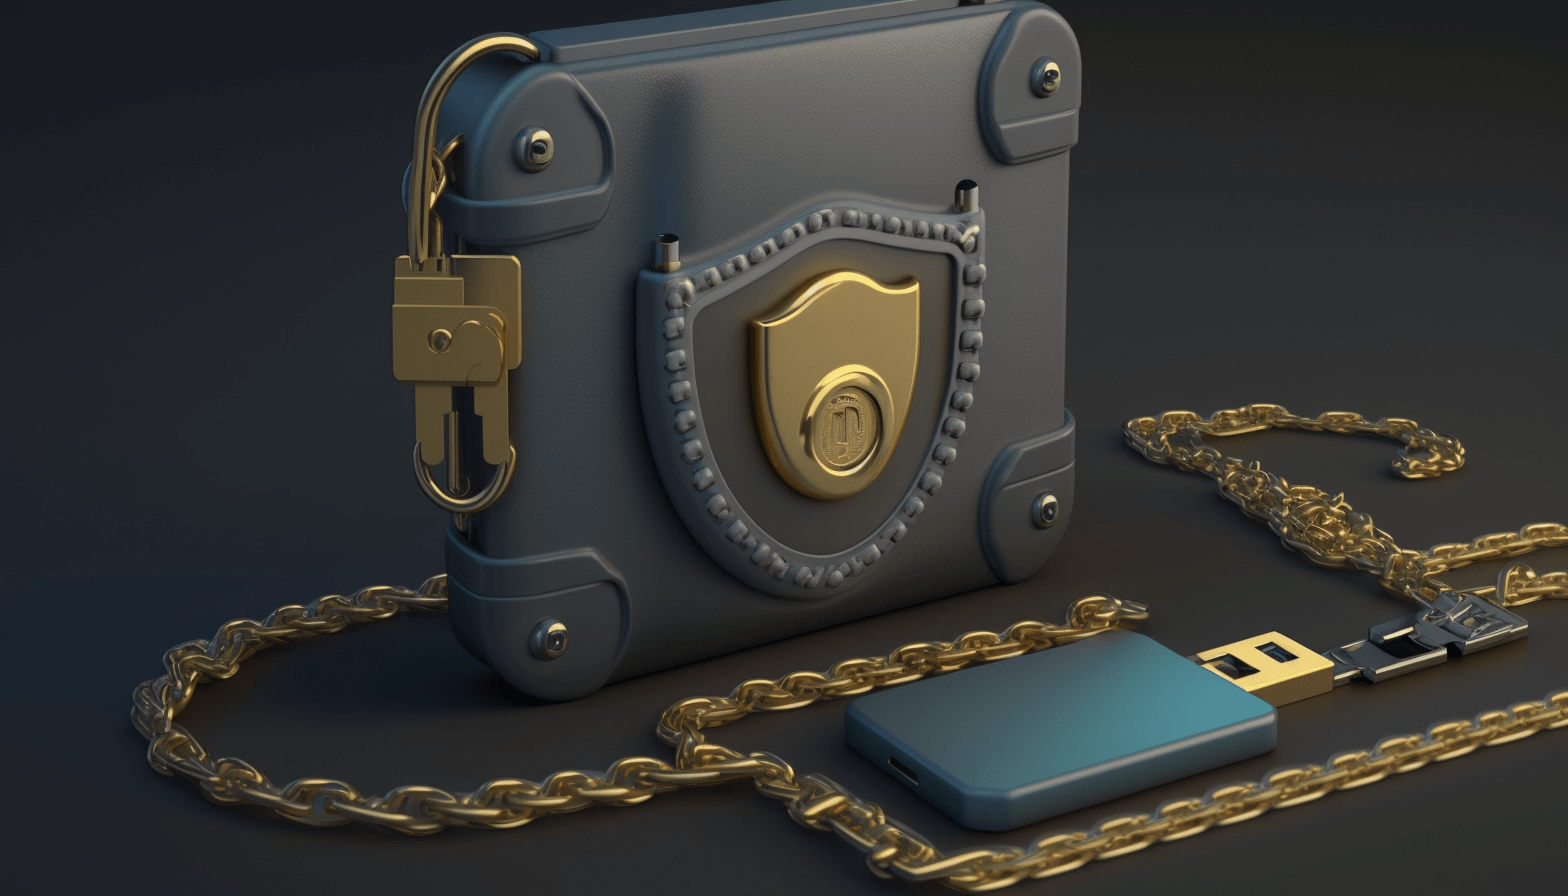 A hardware wallet with a padlock and chain around it, symbolizing the security of storing cryptocurrency in a hardware wallet.